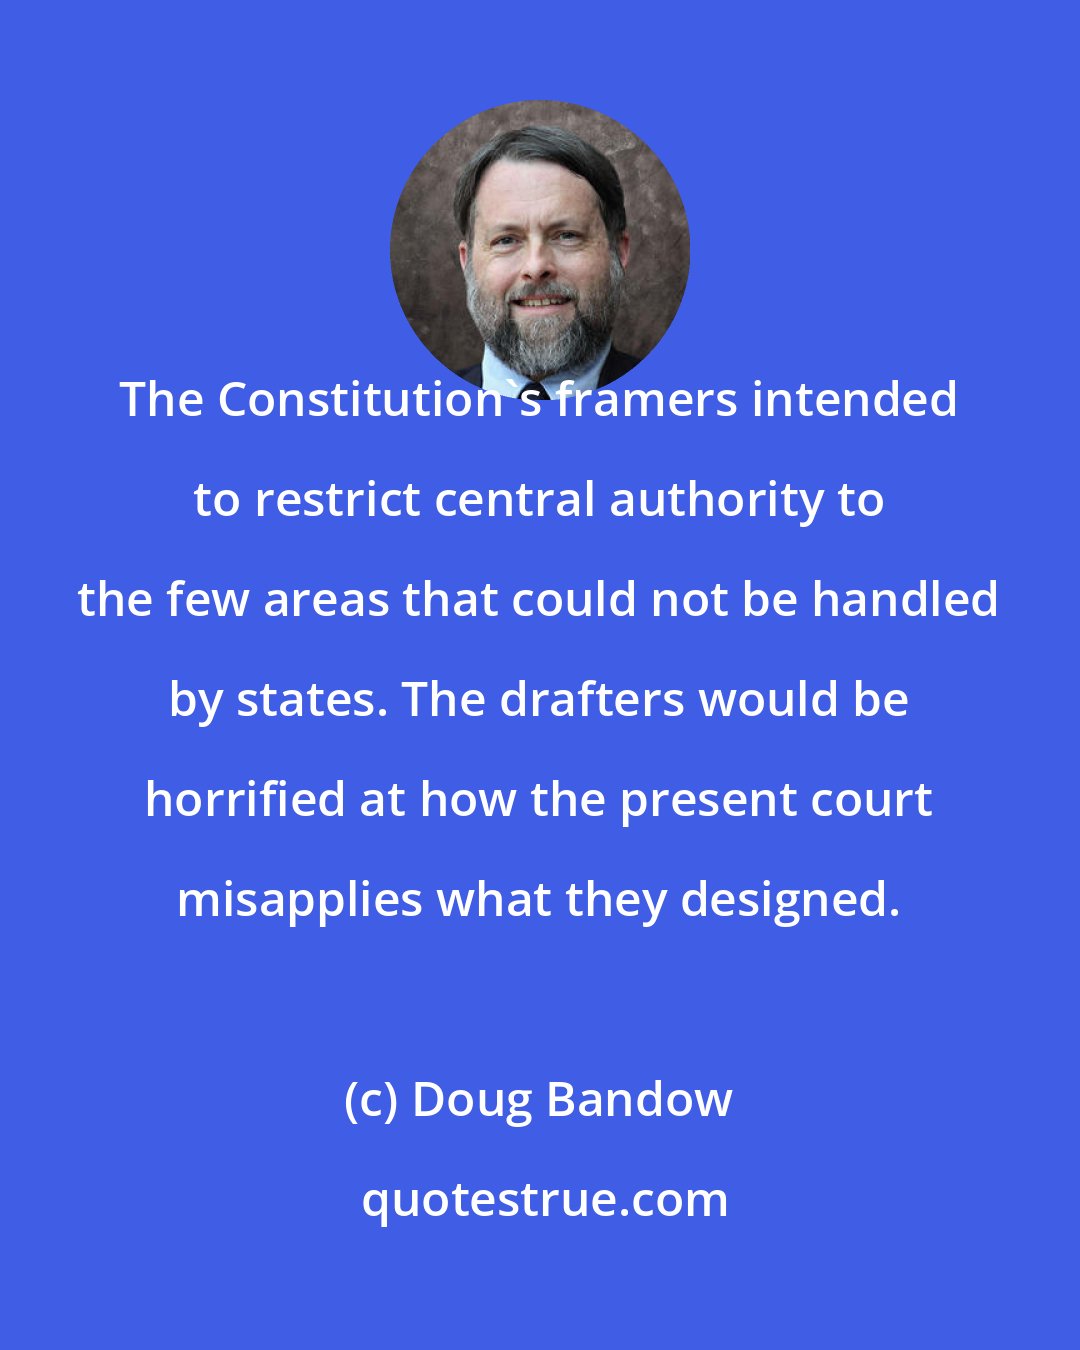 Doug Bandow: The Constitution's framers intended to restrict central authority to the few areas that could not be handled by states. The drafters would be horrified at how the present court misapplies what they designed.